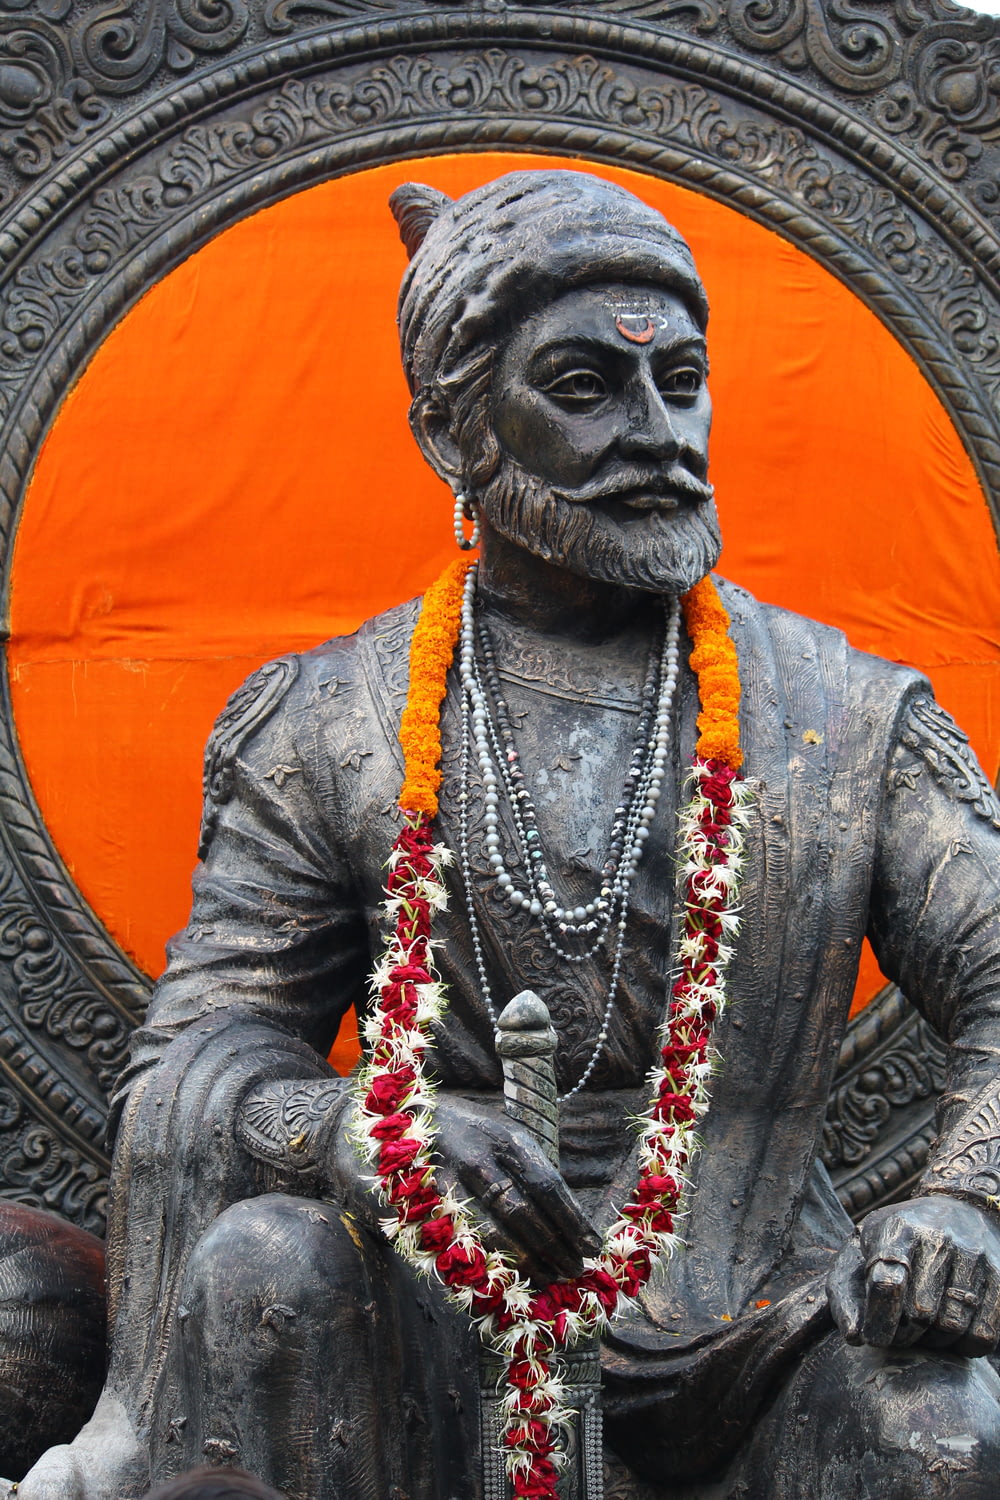 a statue of a man sitting in front of an orange circle